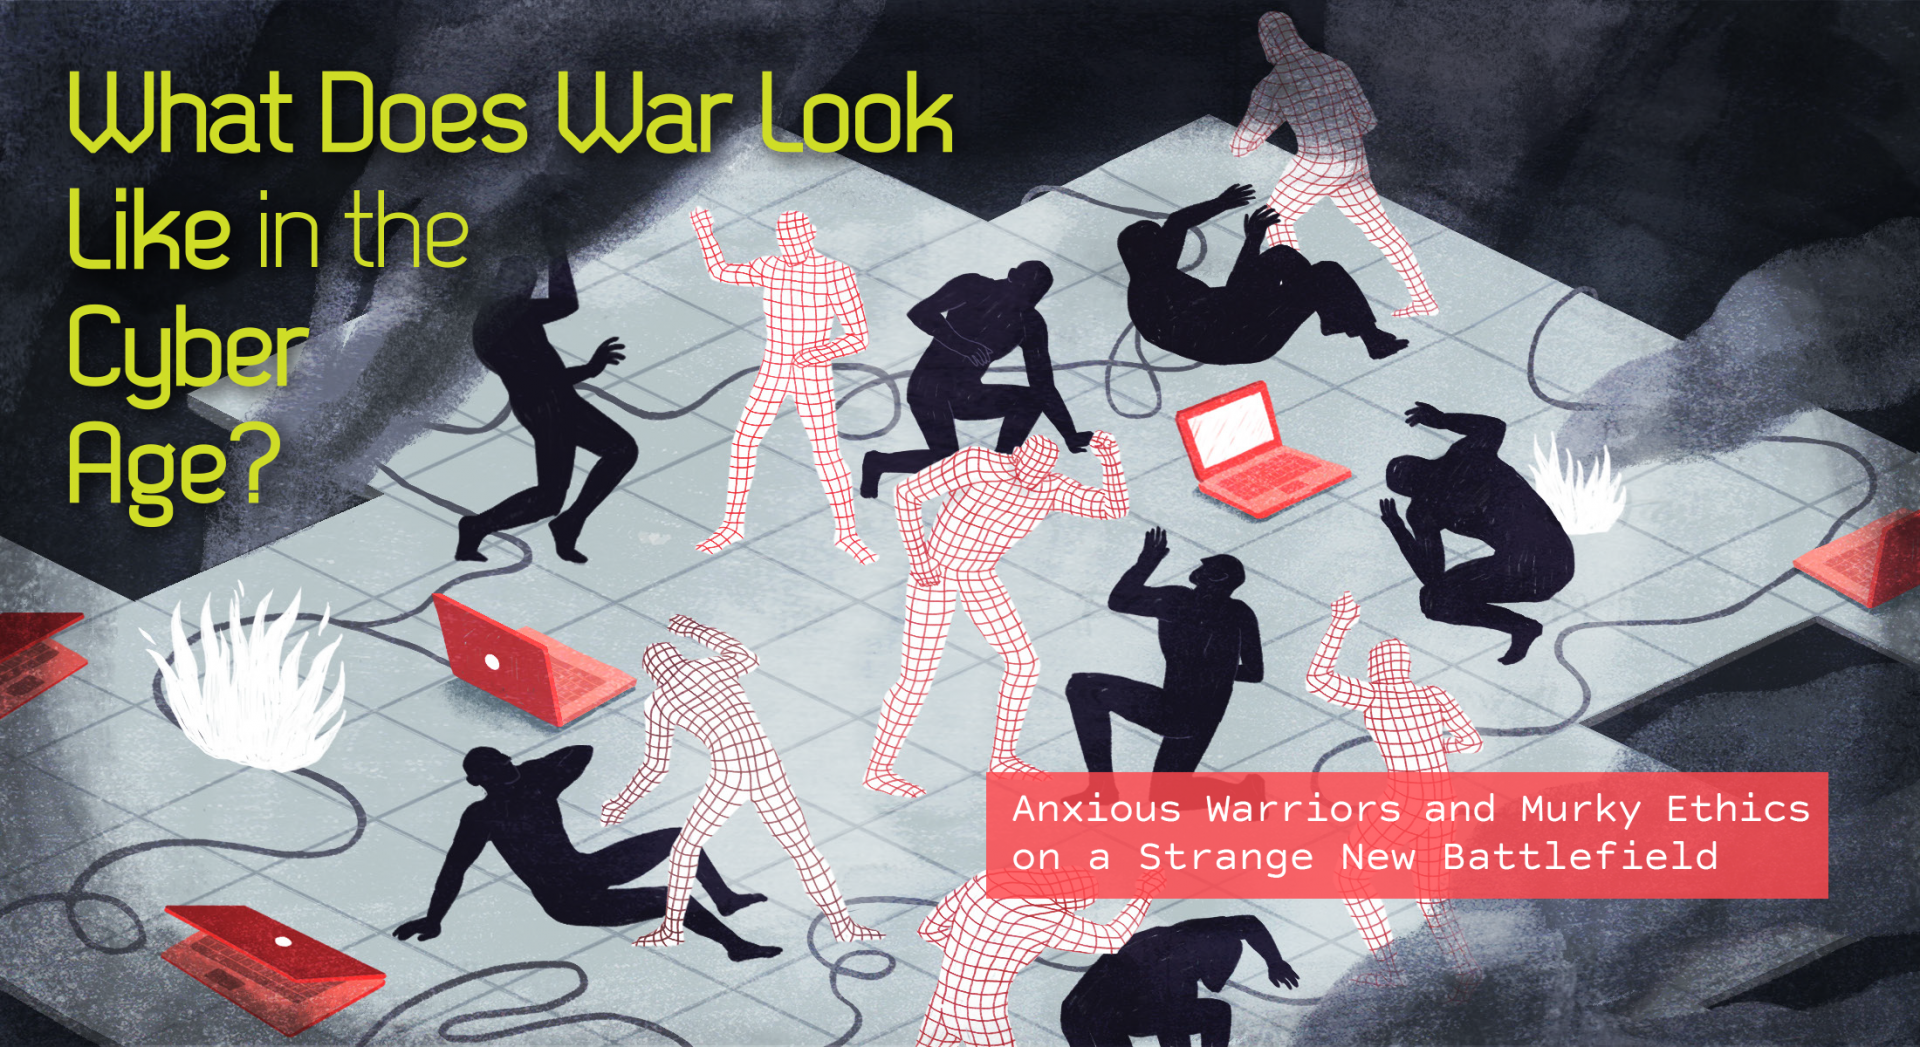 What Does War Look Like in the Cyber Age?